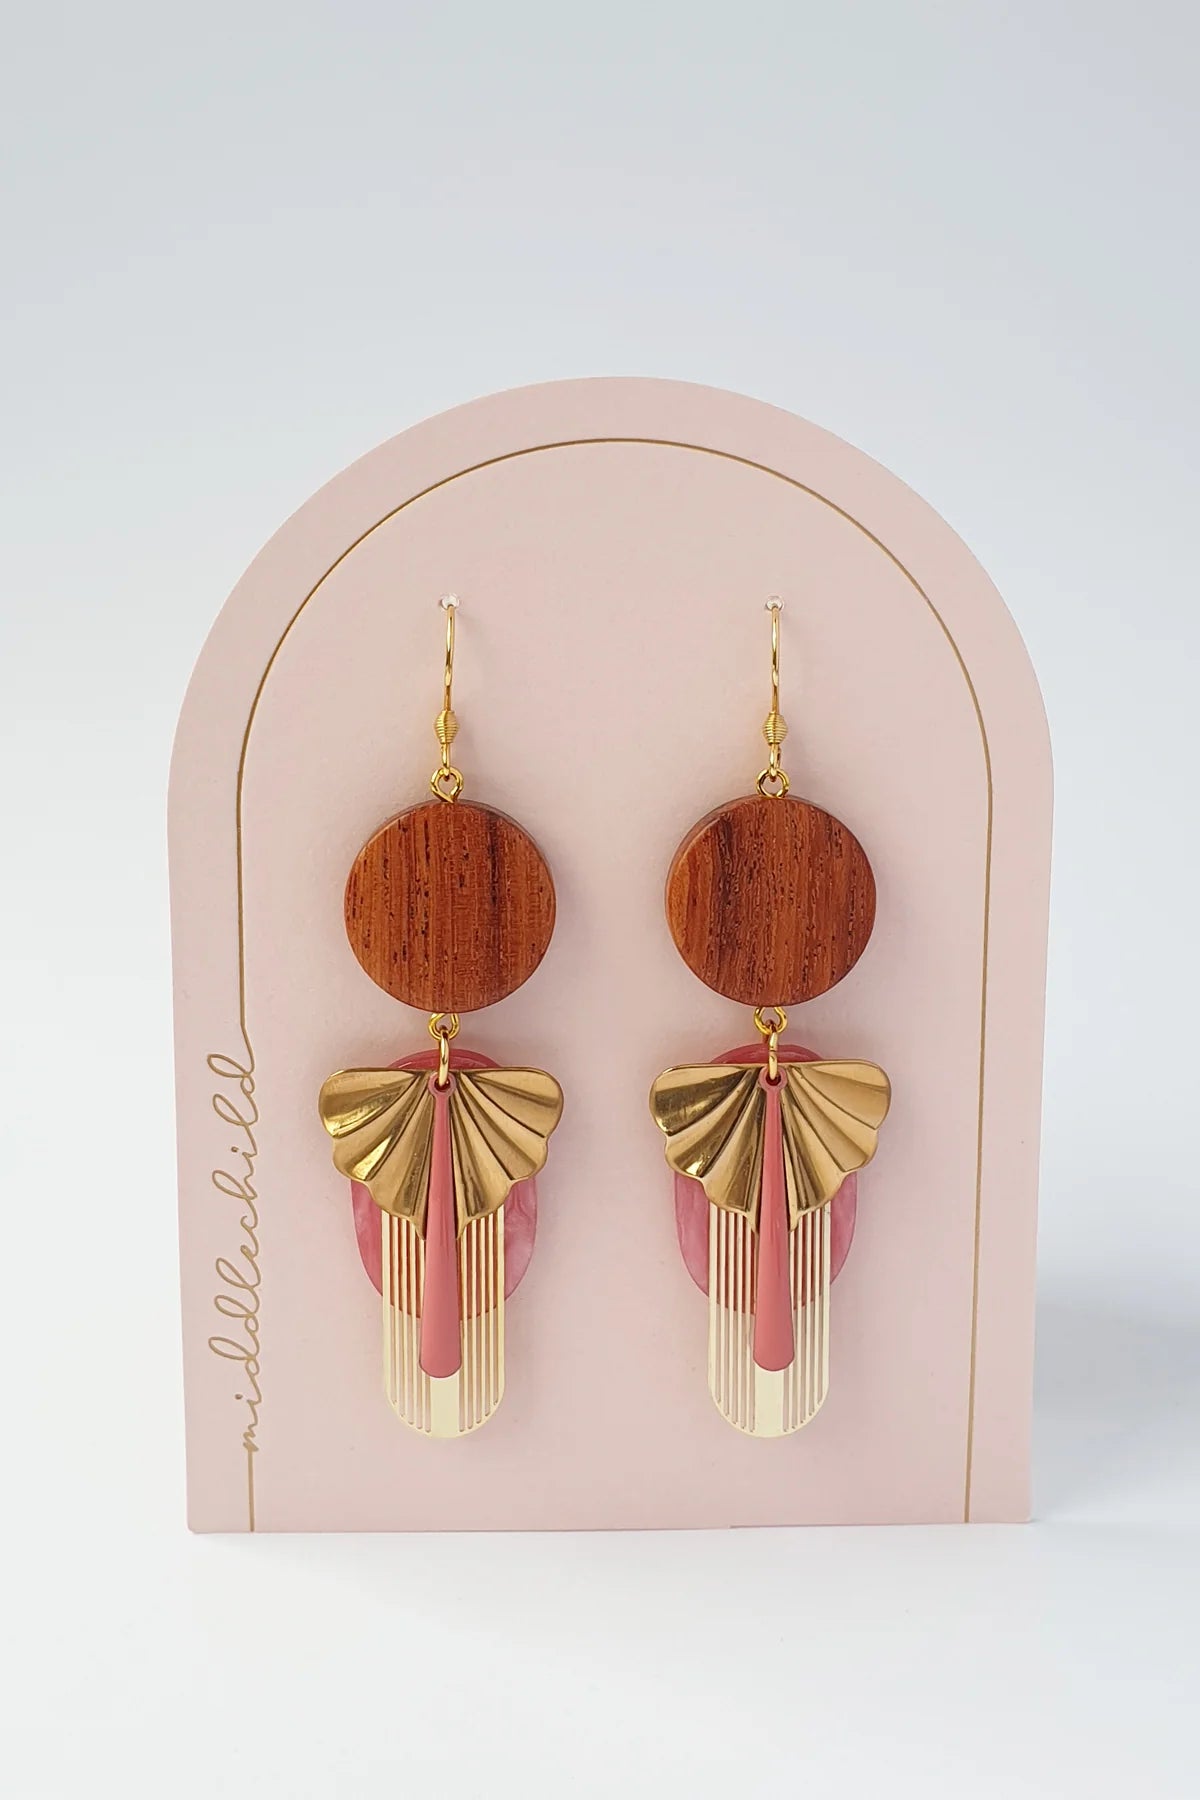 Middle Child - Heartsong Earrings